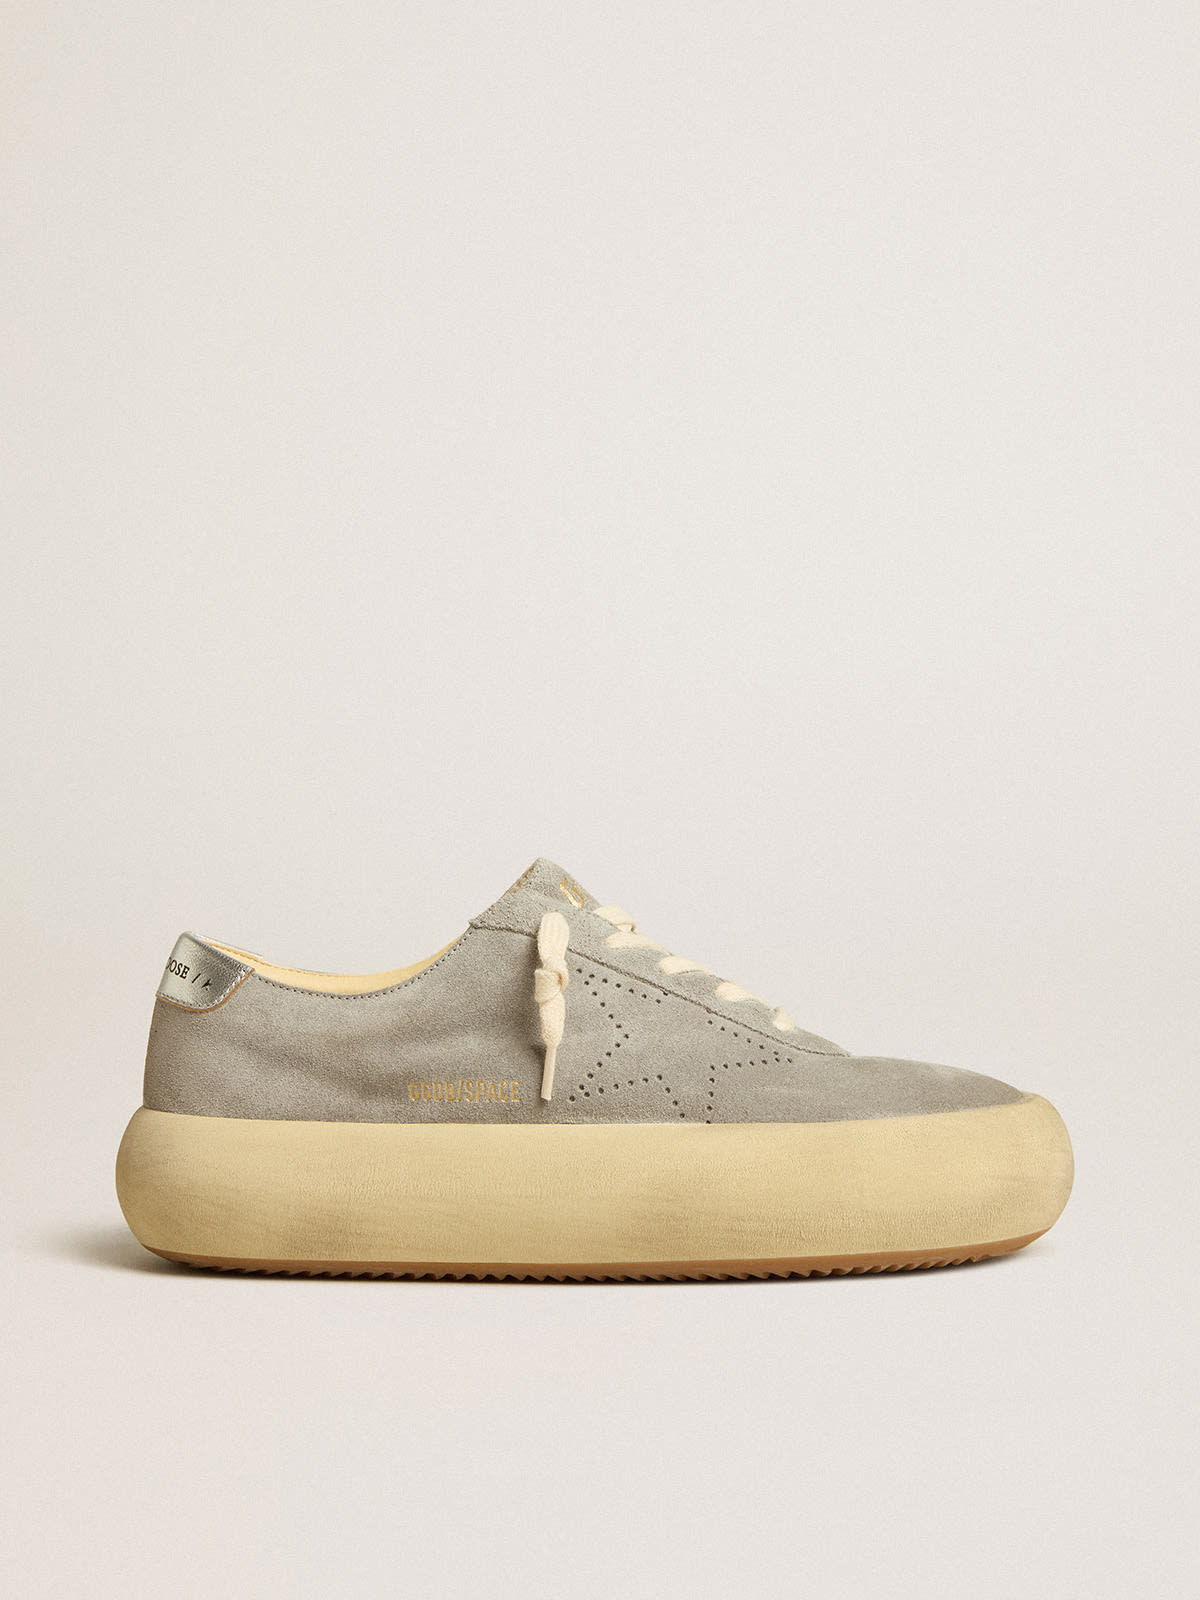 Golden Goose - Women's Space-Star shoes in ice-gray suede with perforated star in 